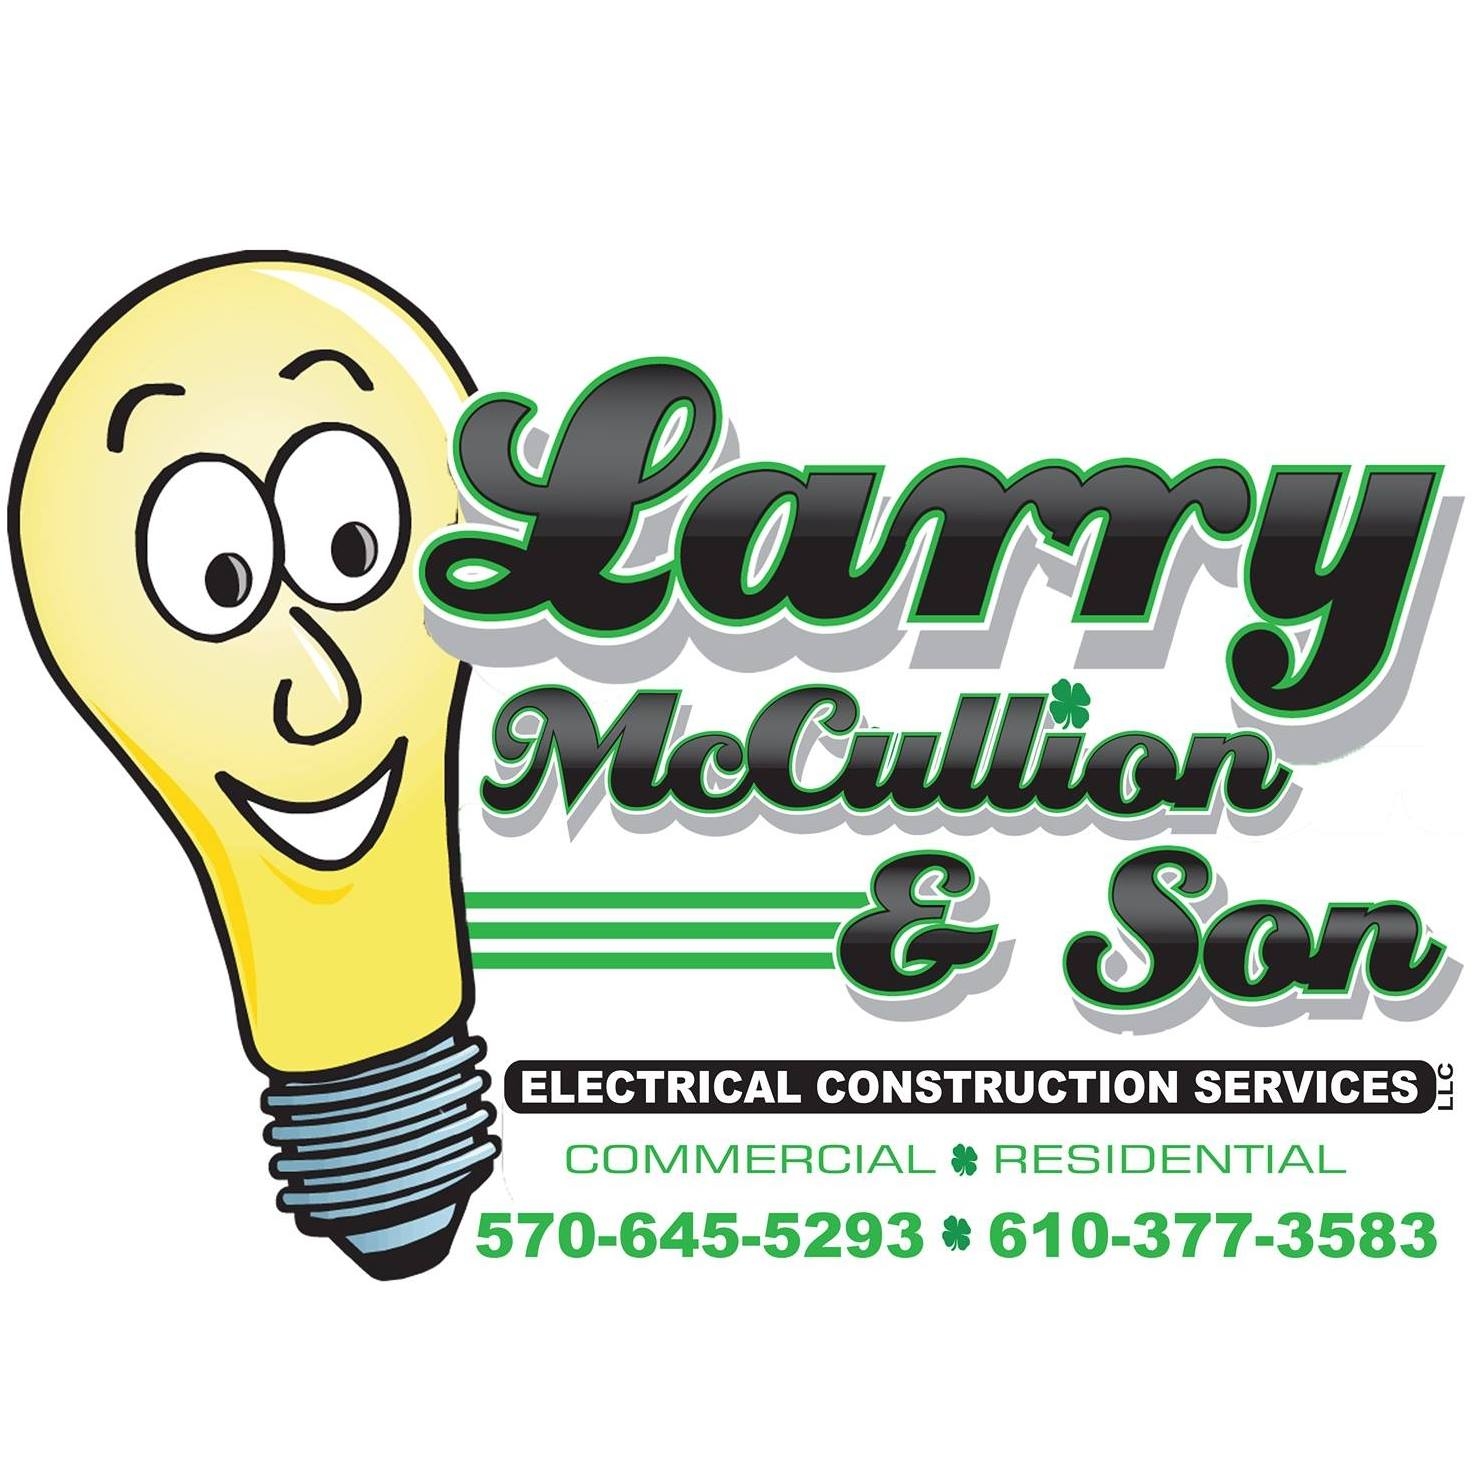 Larry McCullion & Son Electrical Constuction Services 672 W White Bear Dr, Summit Hill Pennsylvania 18250